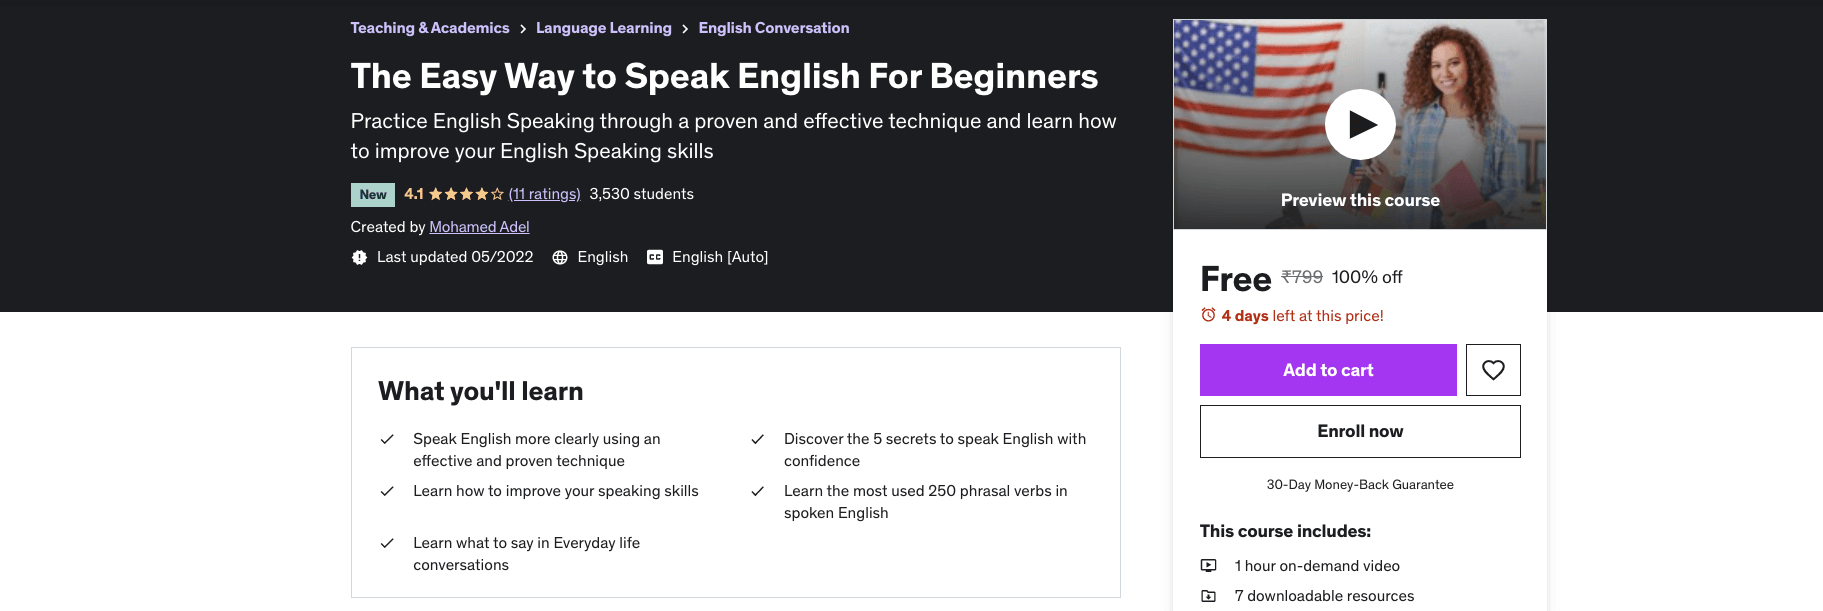 The Easy Way to Speak English For Beginners